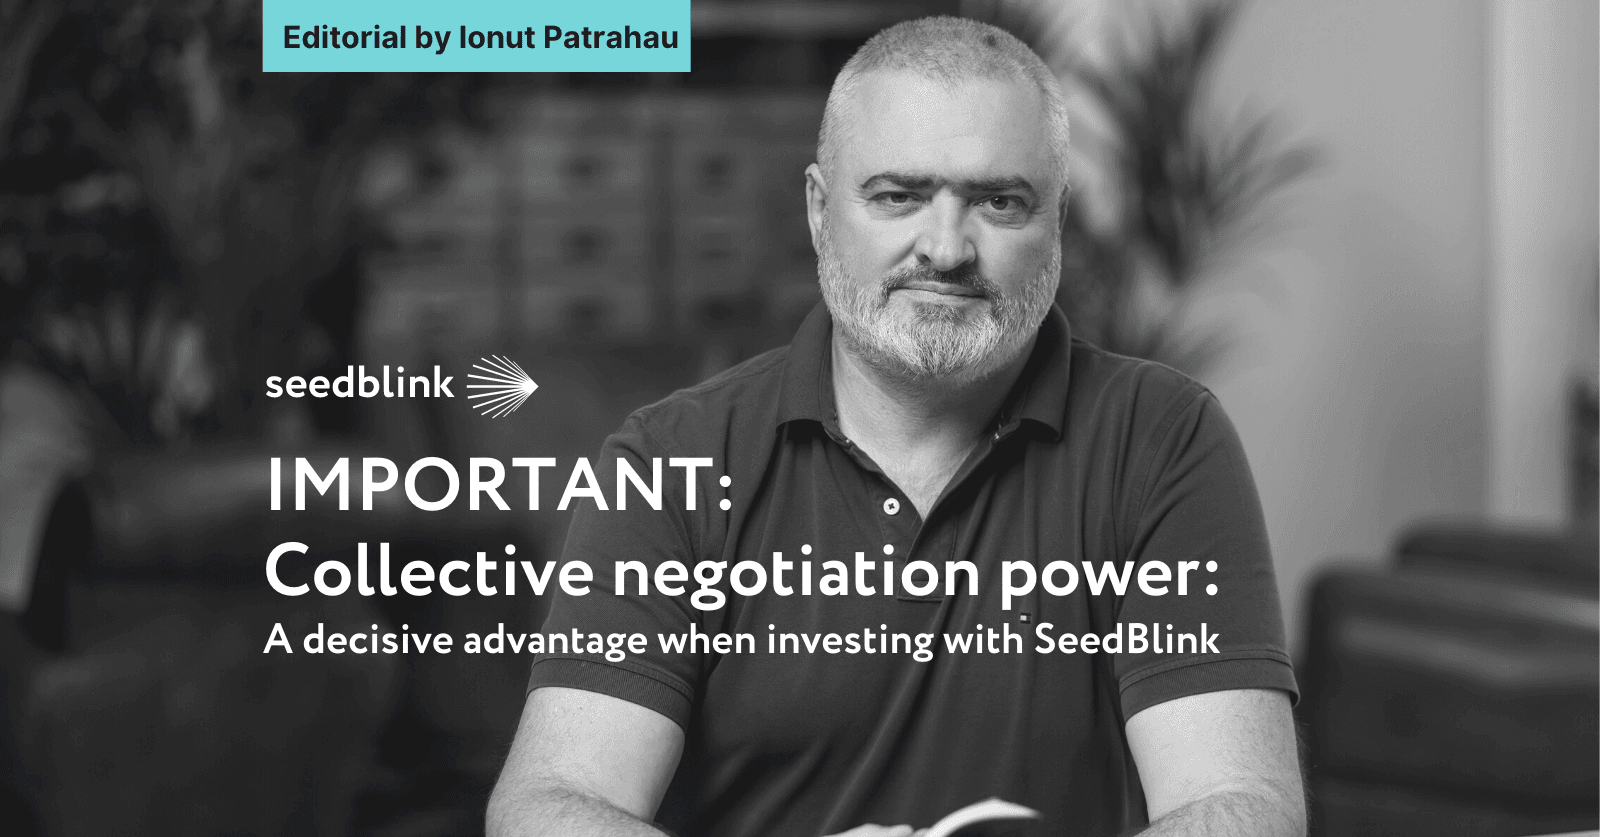 Collective negotiation power: A decisive advantage when investing with SeedBlink